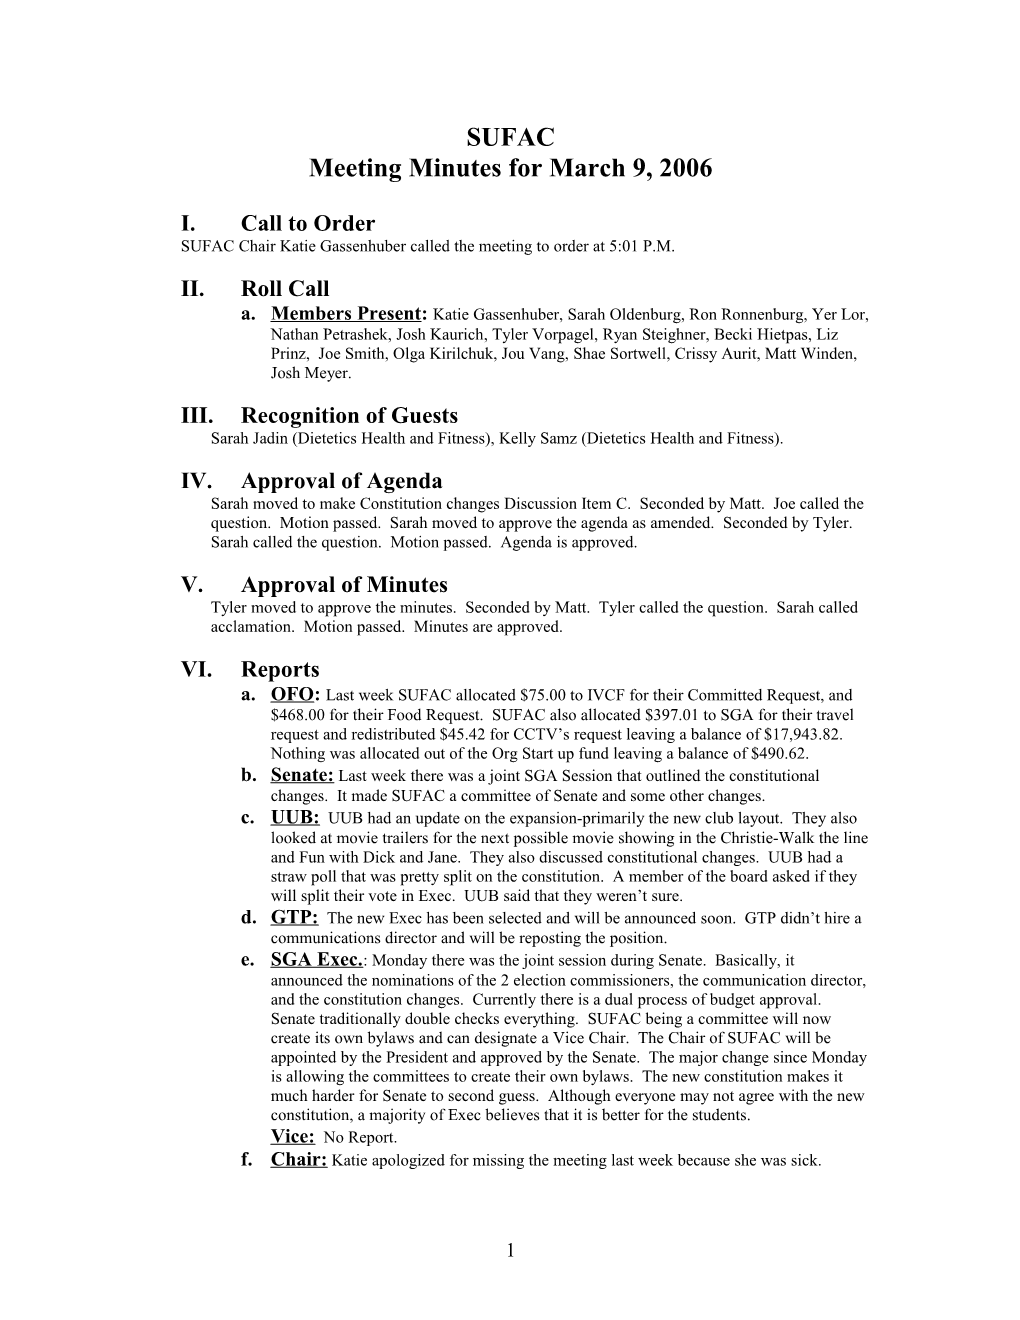 Meeting Minutes for March 9, 2006